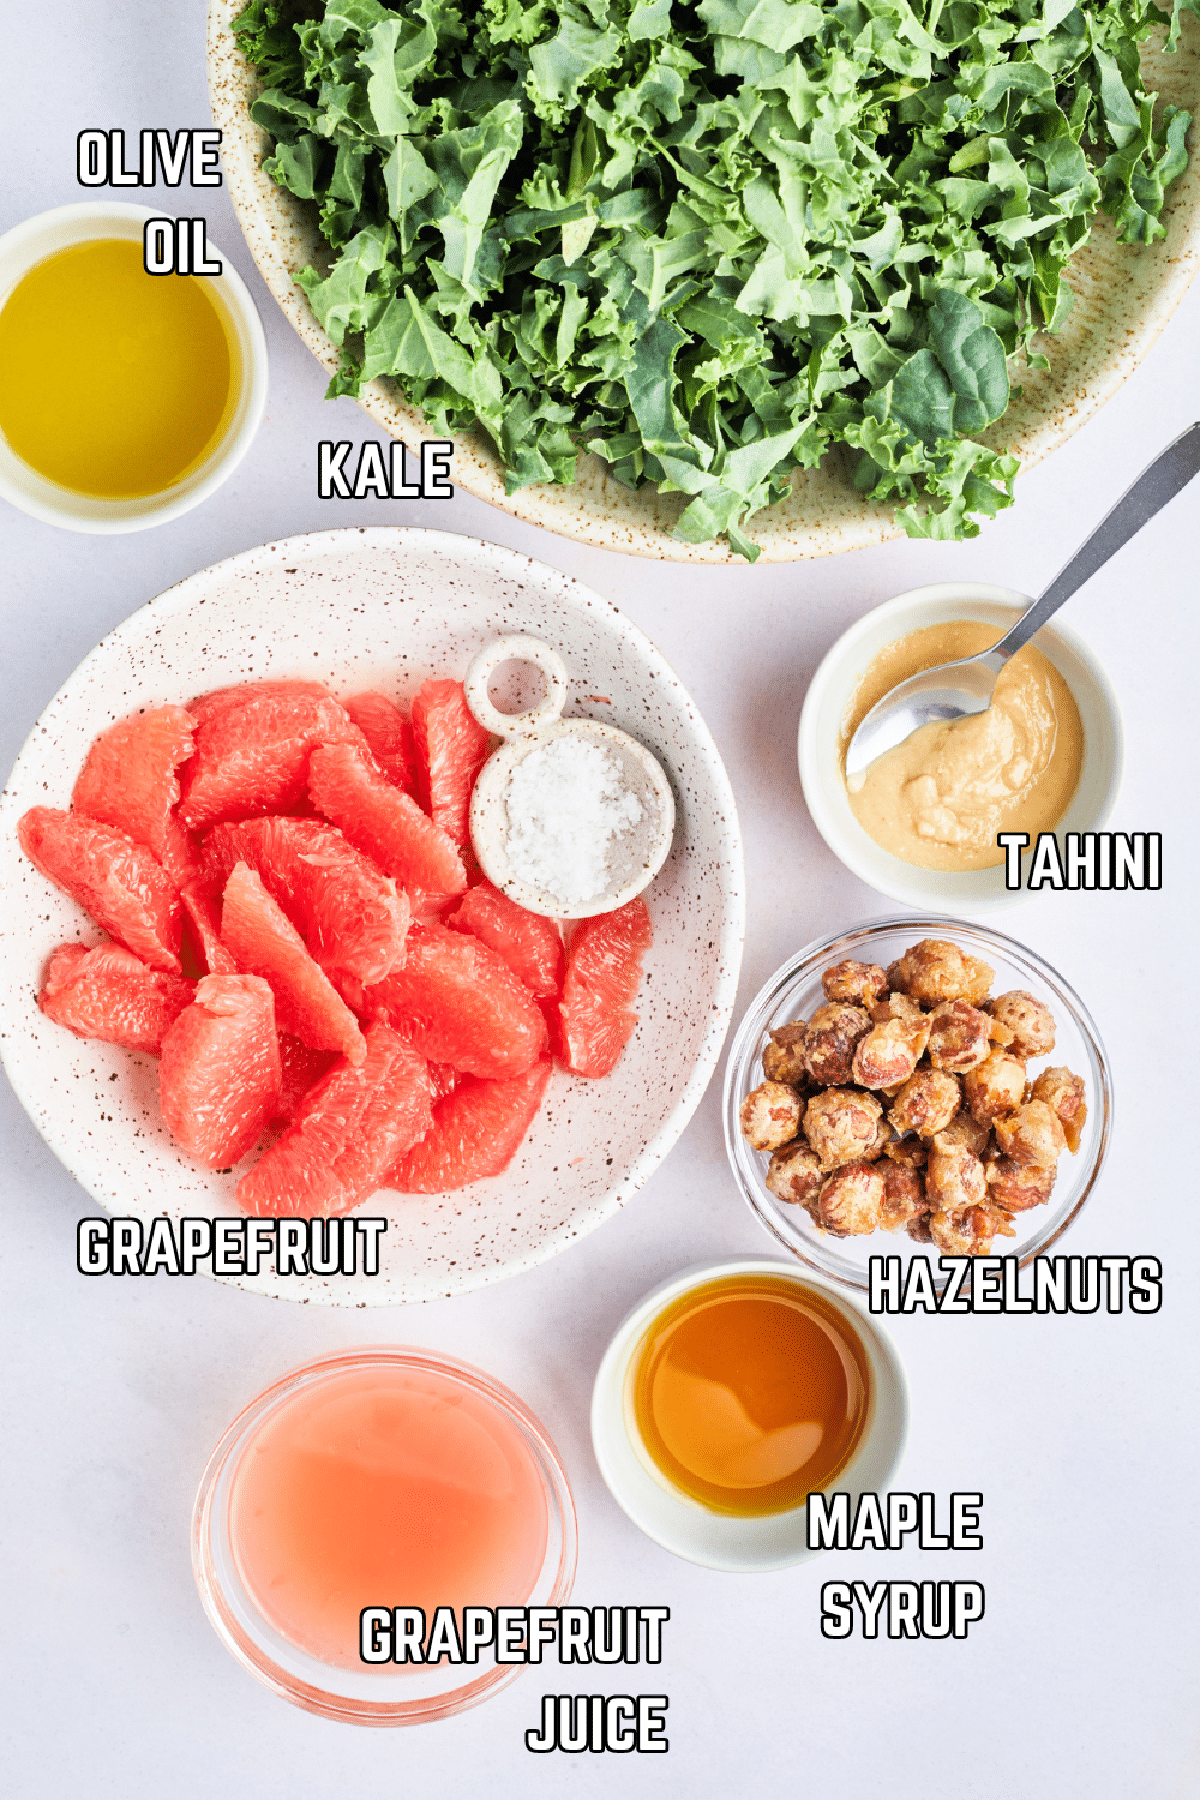 Overhead view of bowls of ingredients to make salad: kale, olive oil, tahini, grapefruit, hazelnuts, maple syrup, and grapefruit juice.